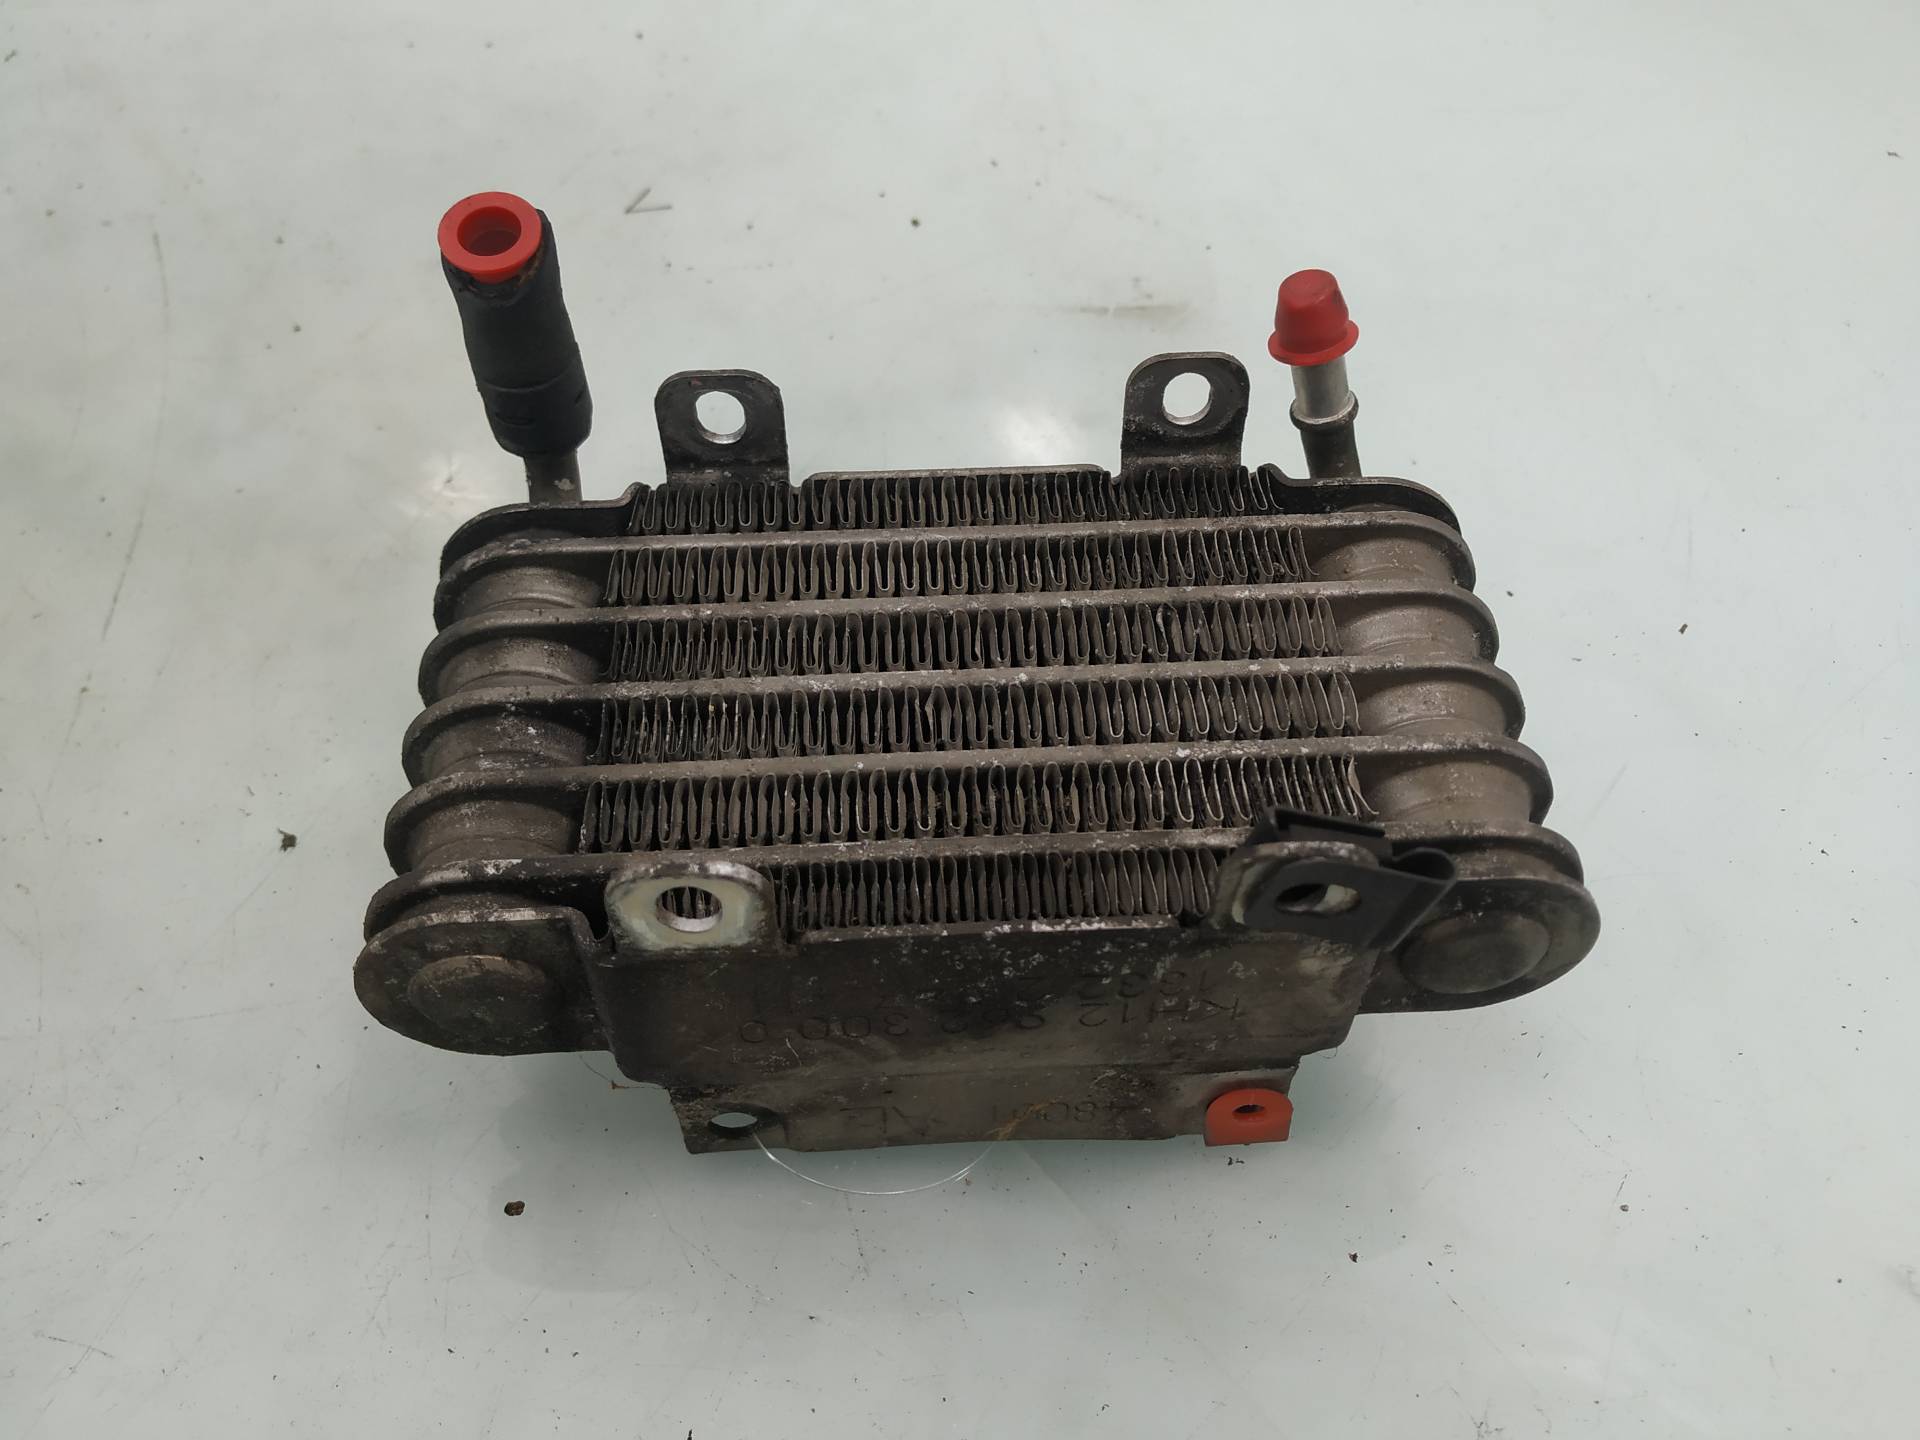 BMW 3 Series E46 (1997-2006) Other Engine Compartment Parts 9623000 19032055